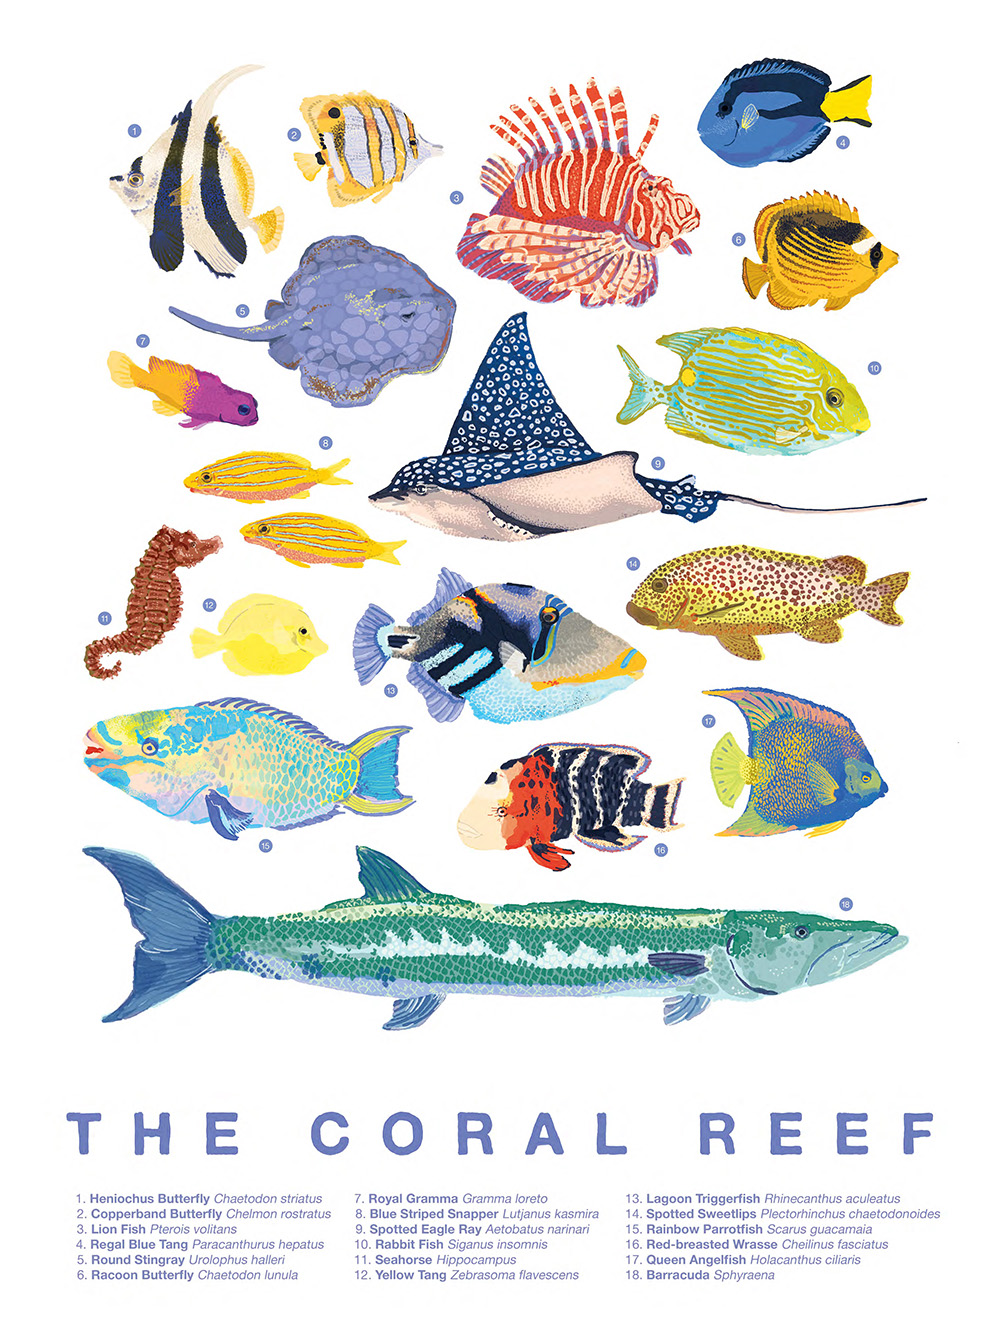 illustrated fish on a poster about the coral reef